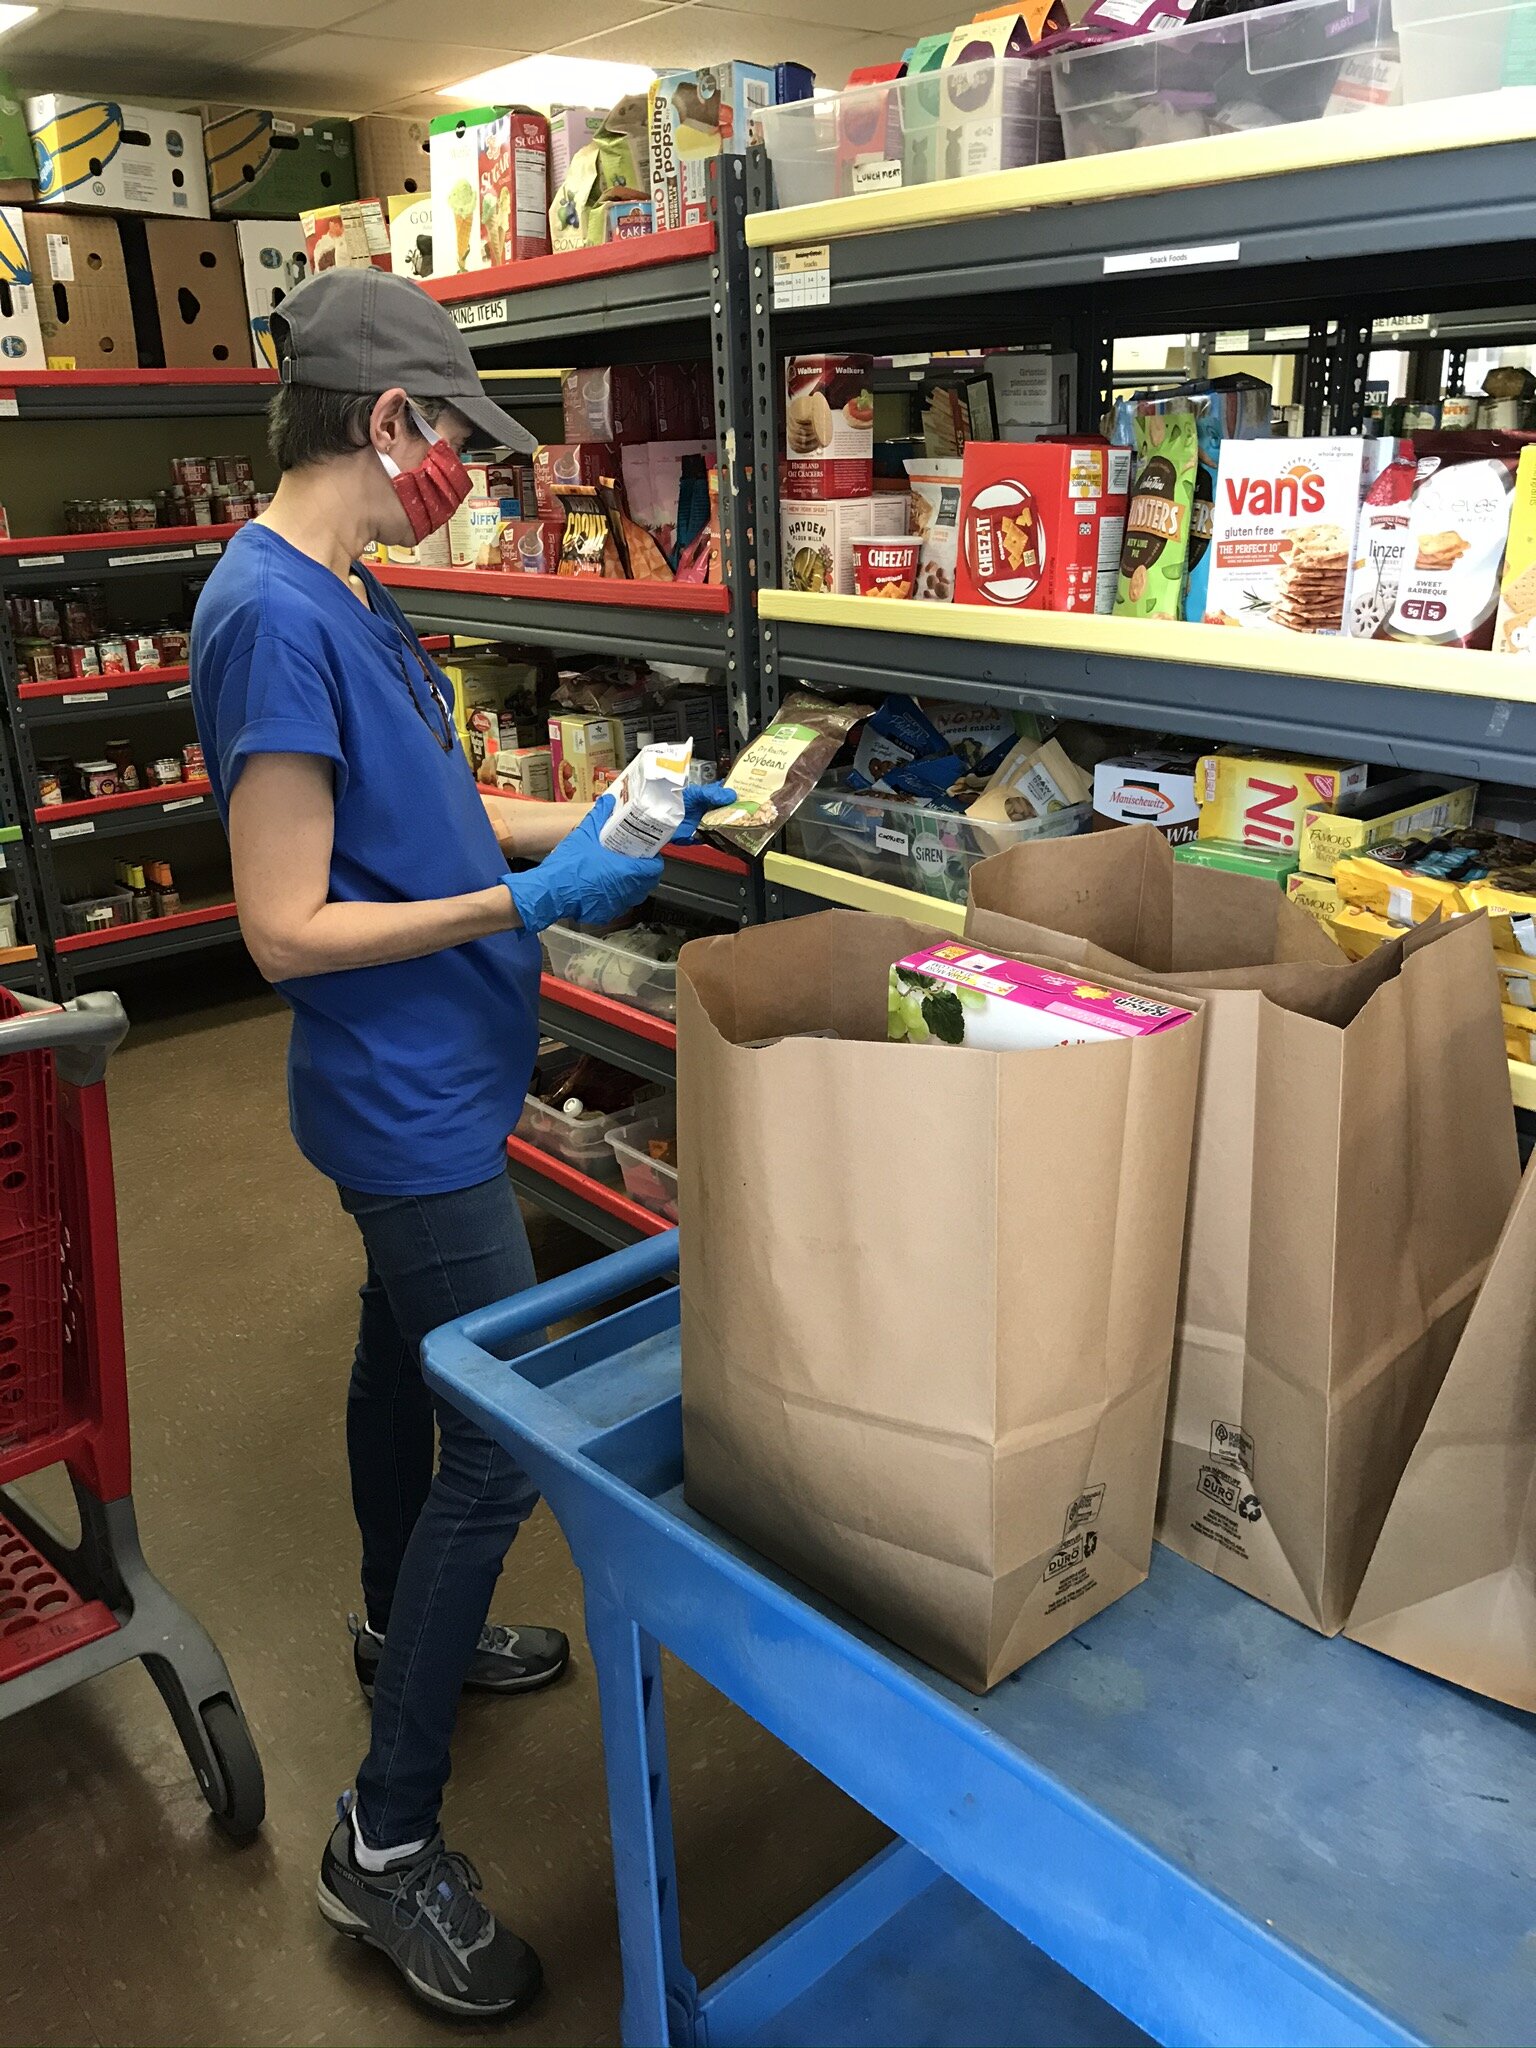 BEAM volunteer, Cindy, packs groceries on behalf of a food pantry client. BEAM’s food pantry appointments remain fully booked for the next few weeks.